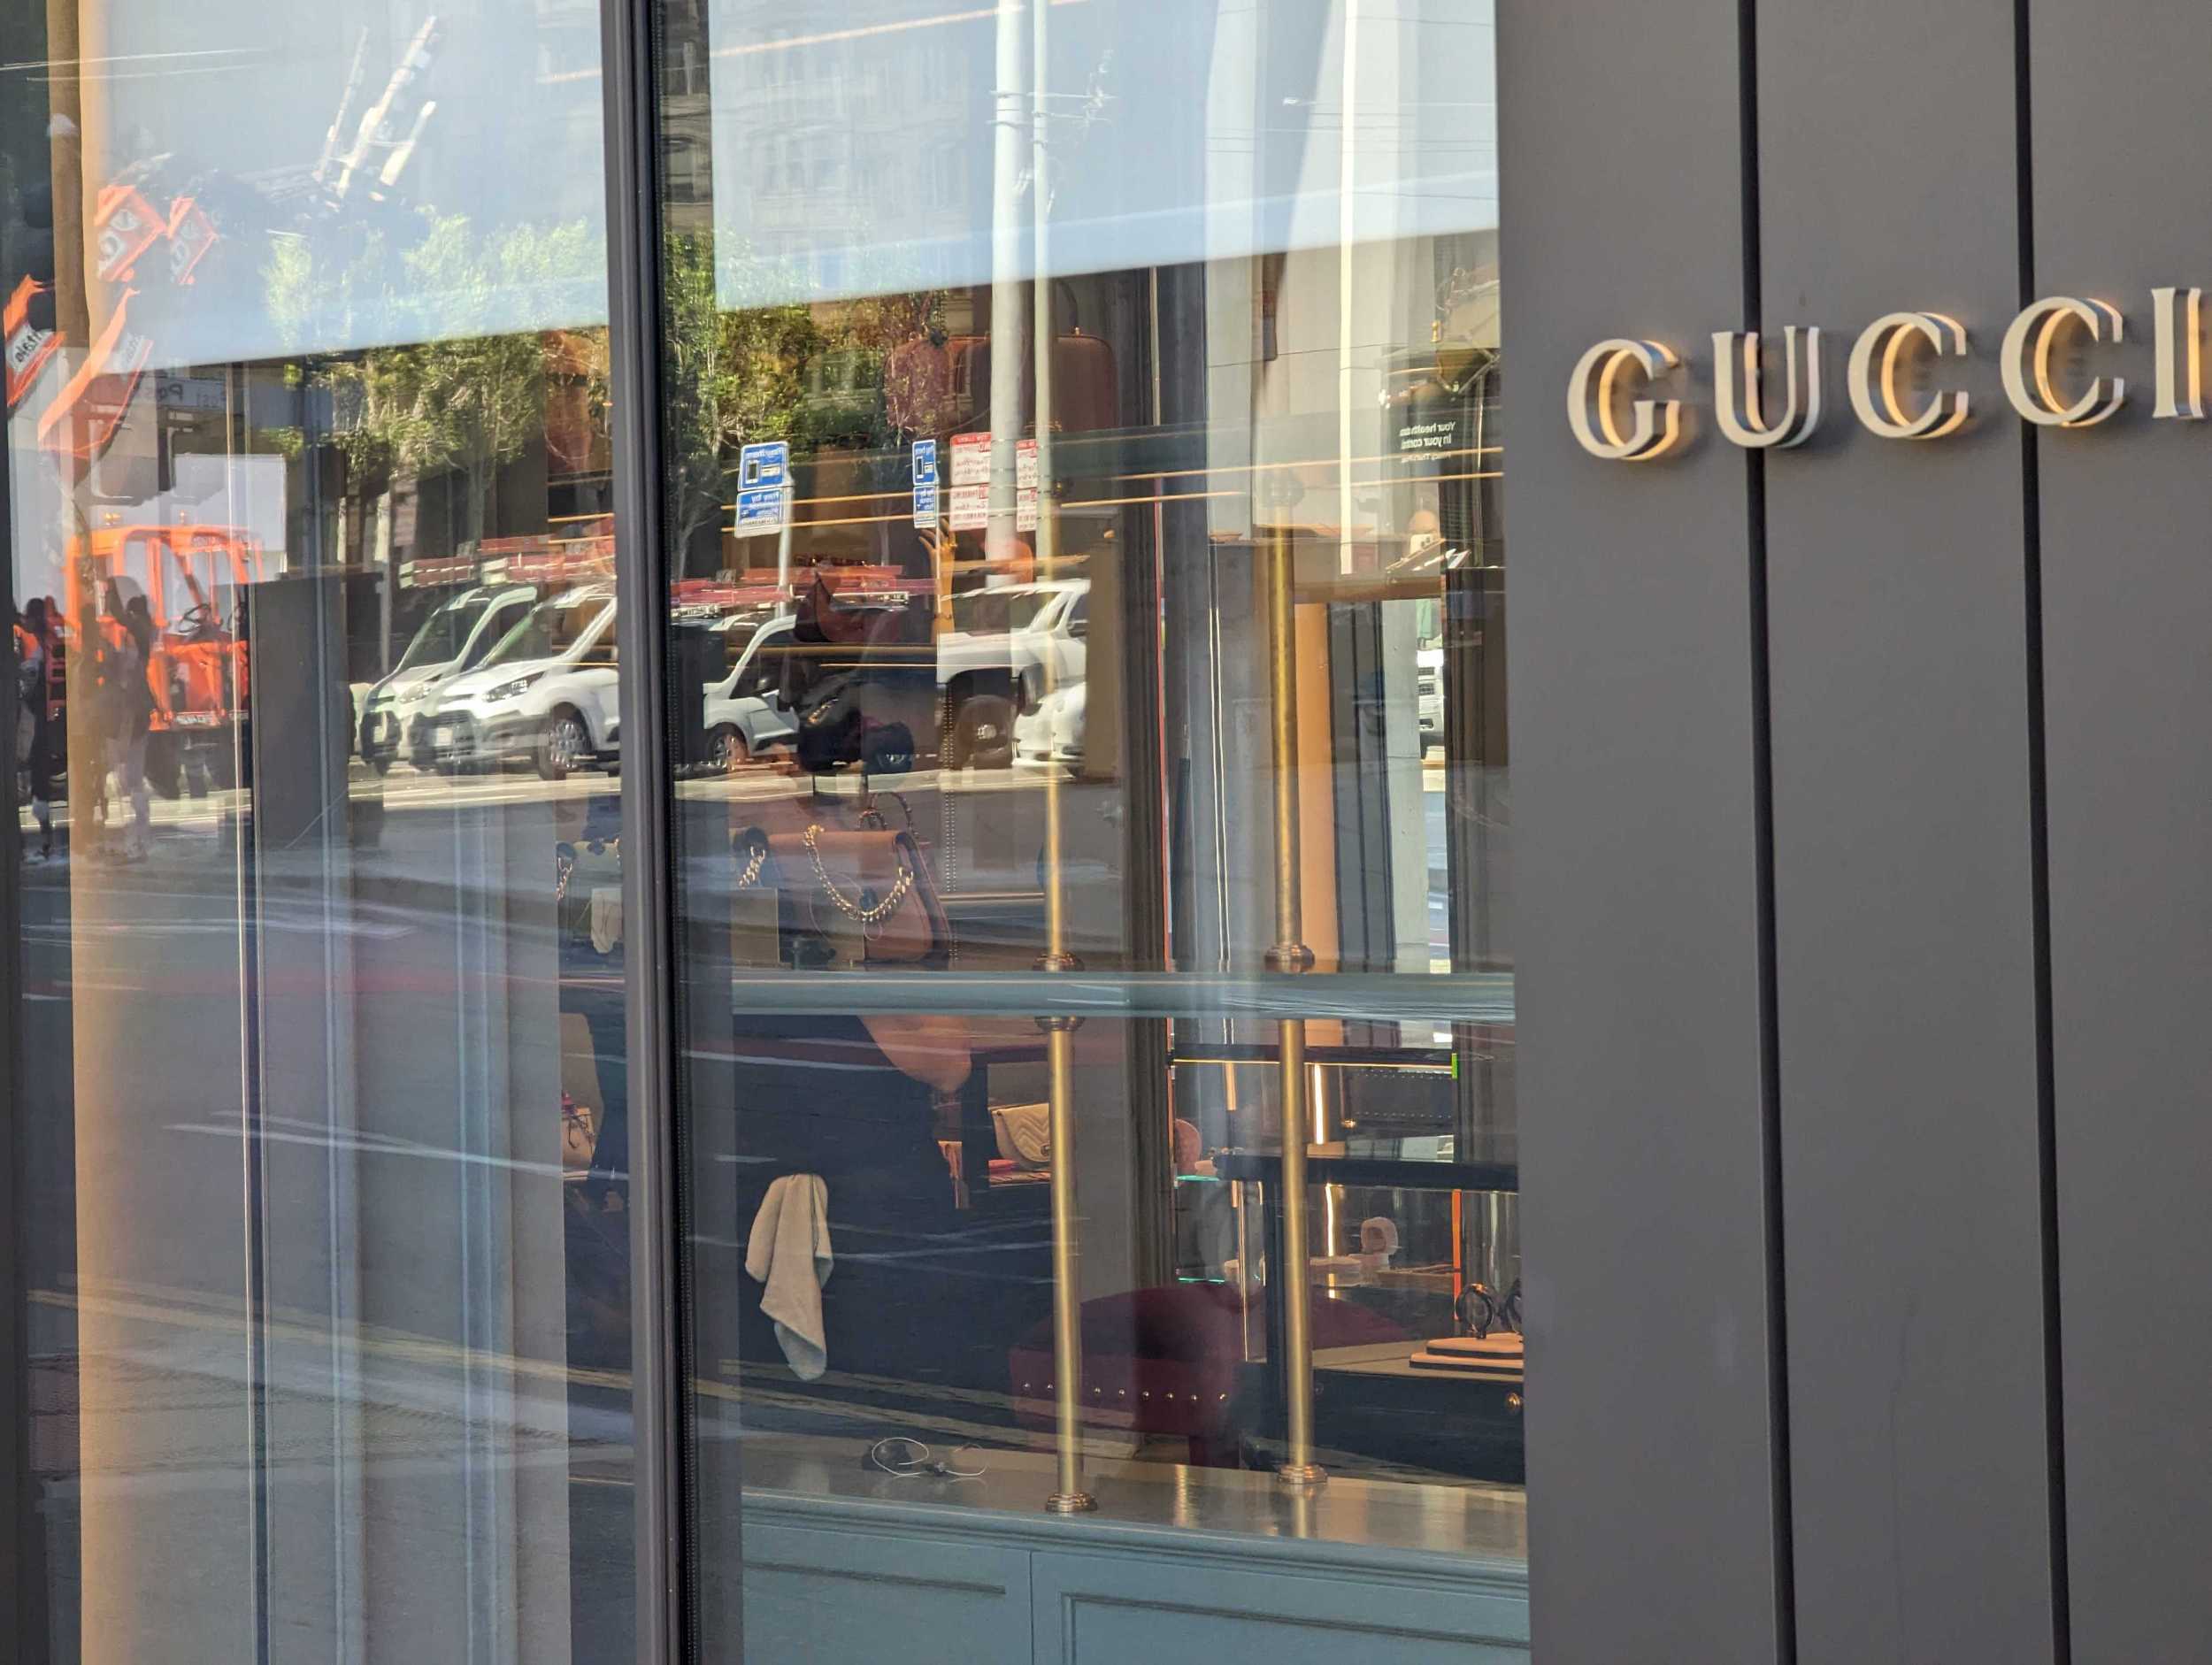 A worker readies to open the flagship Gucci Store in San Francisco's Union Square shopping district Tuesday | George Kelly/The Standard